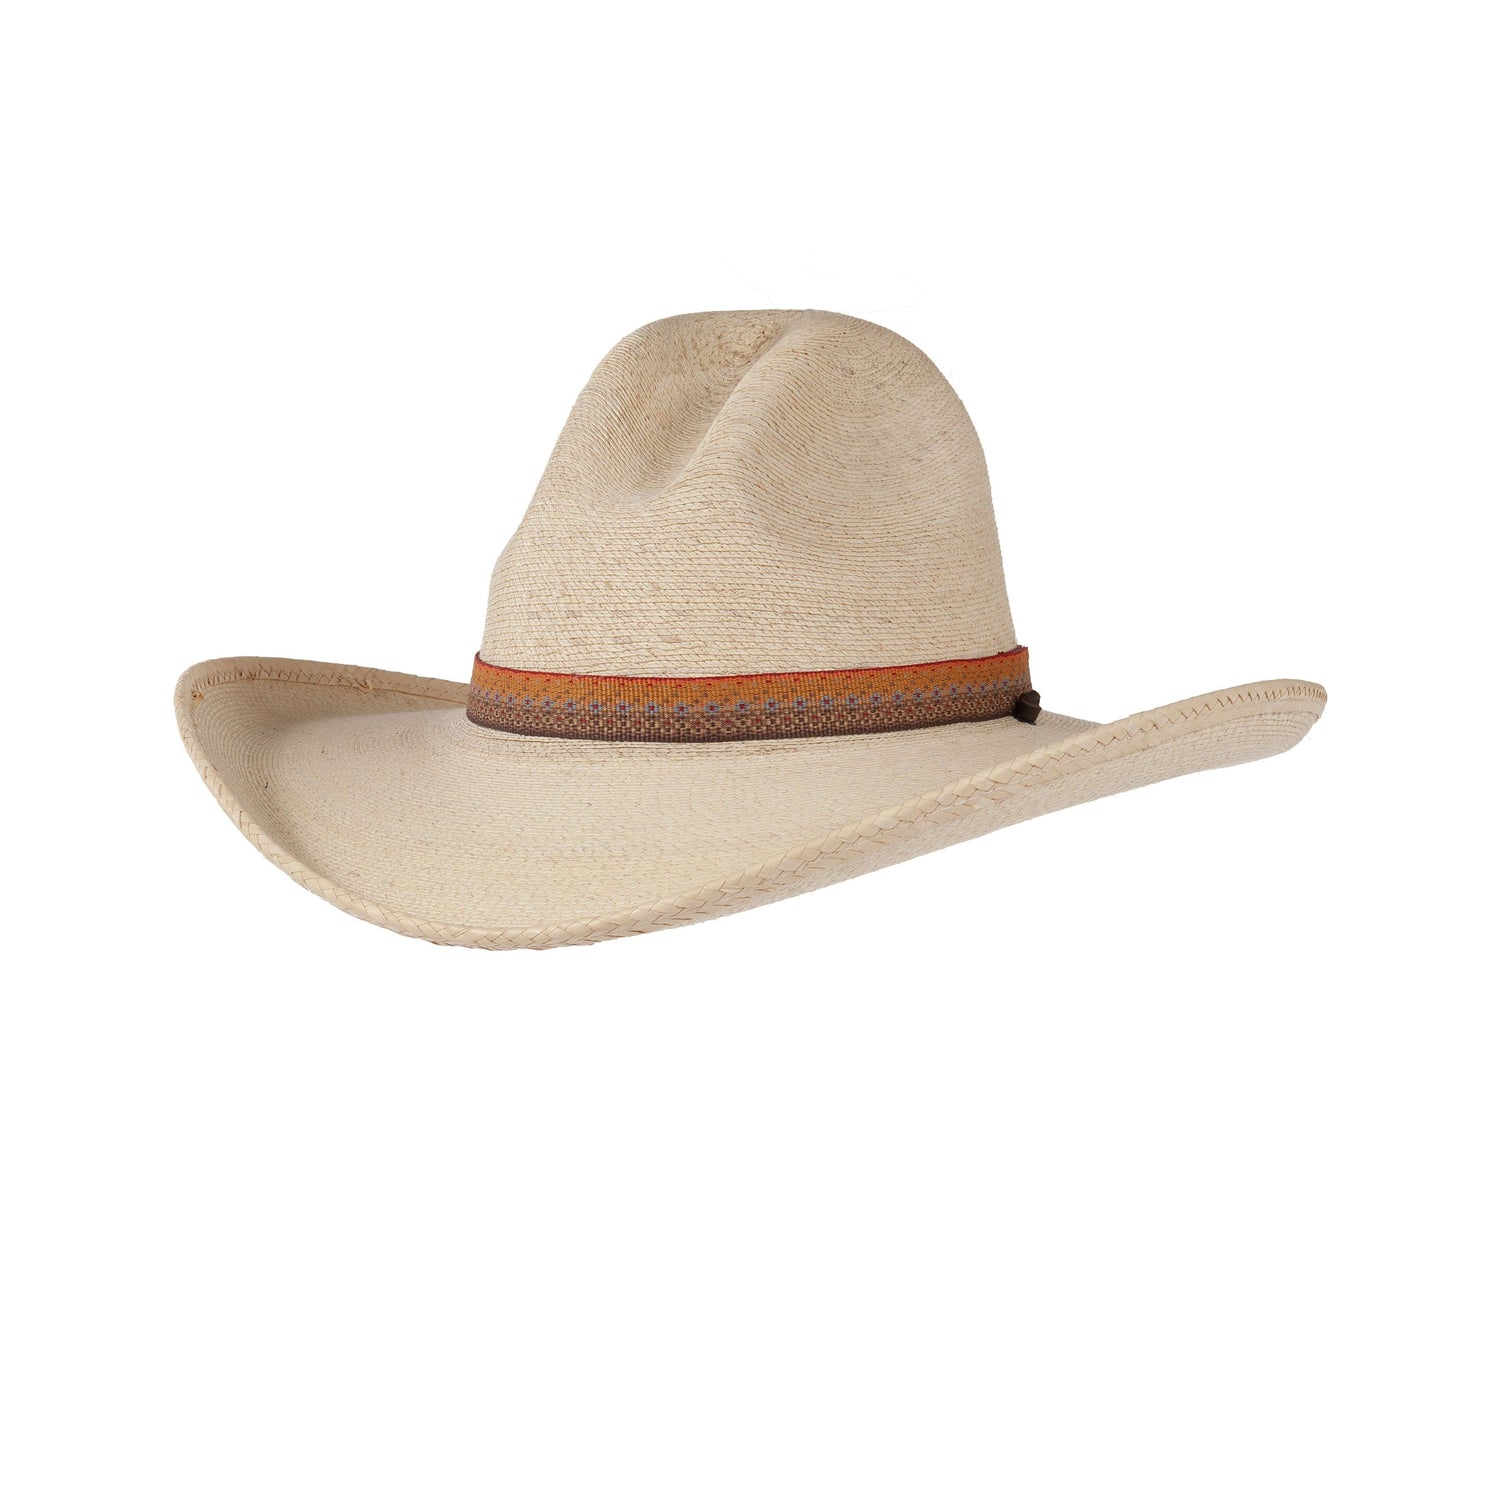  Eddy River Hat front